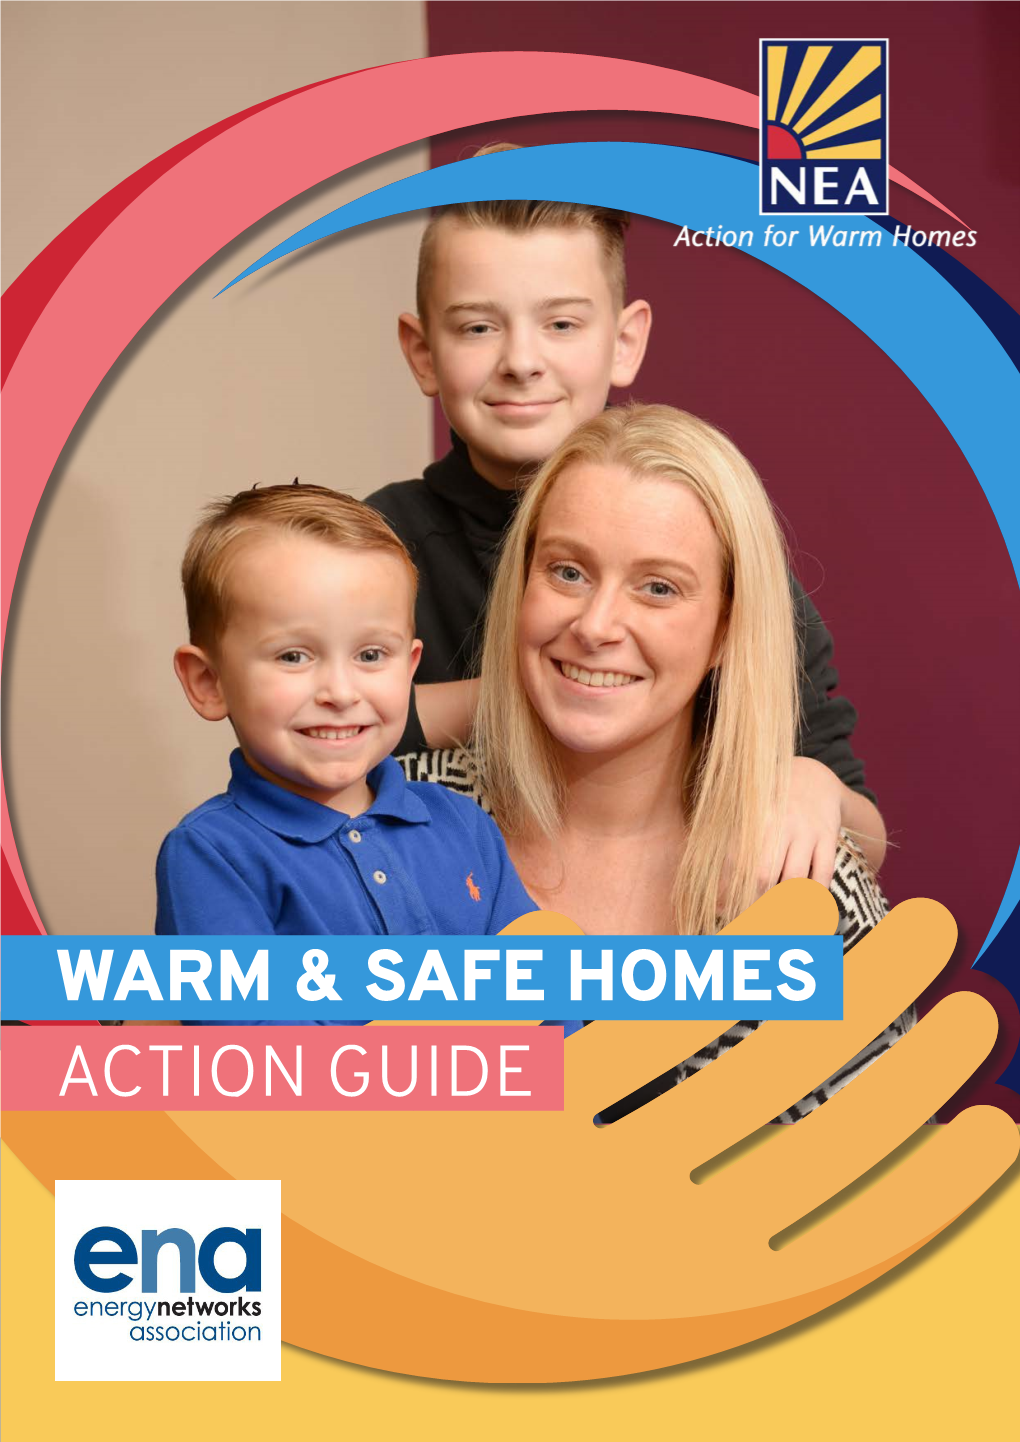 Warm & Safe Homes Action Guide